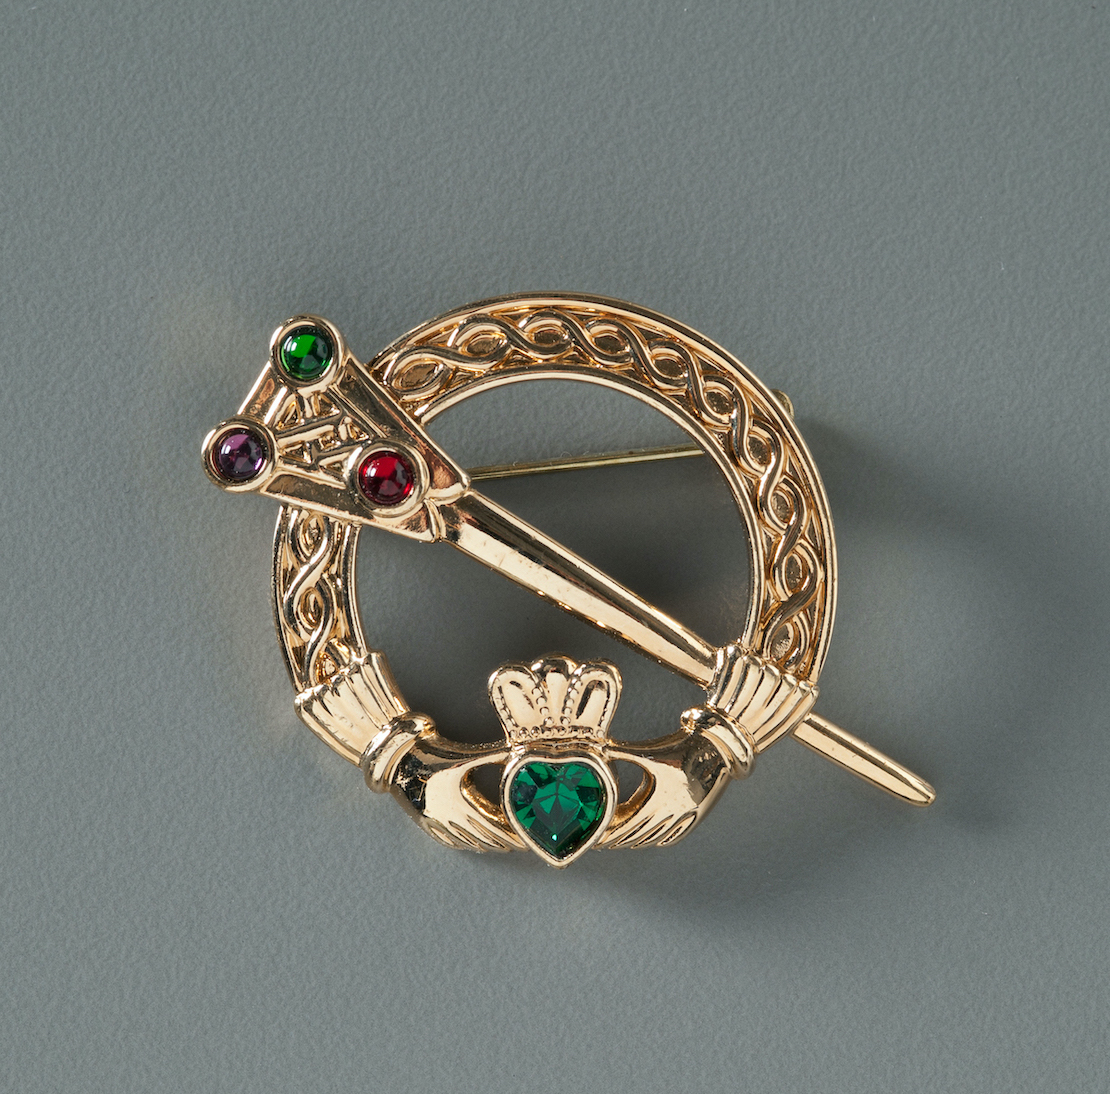 A gold Irish Claddagh brooch belonging to Kathleen Moran is displayed on a gray surface. The jewelry includes emerald stones. 